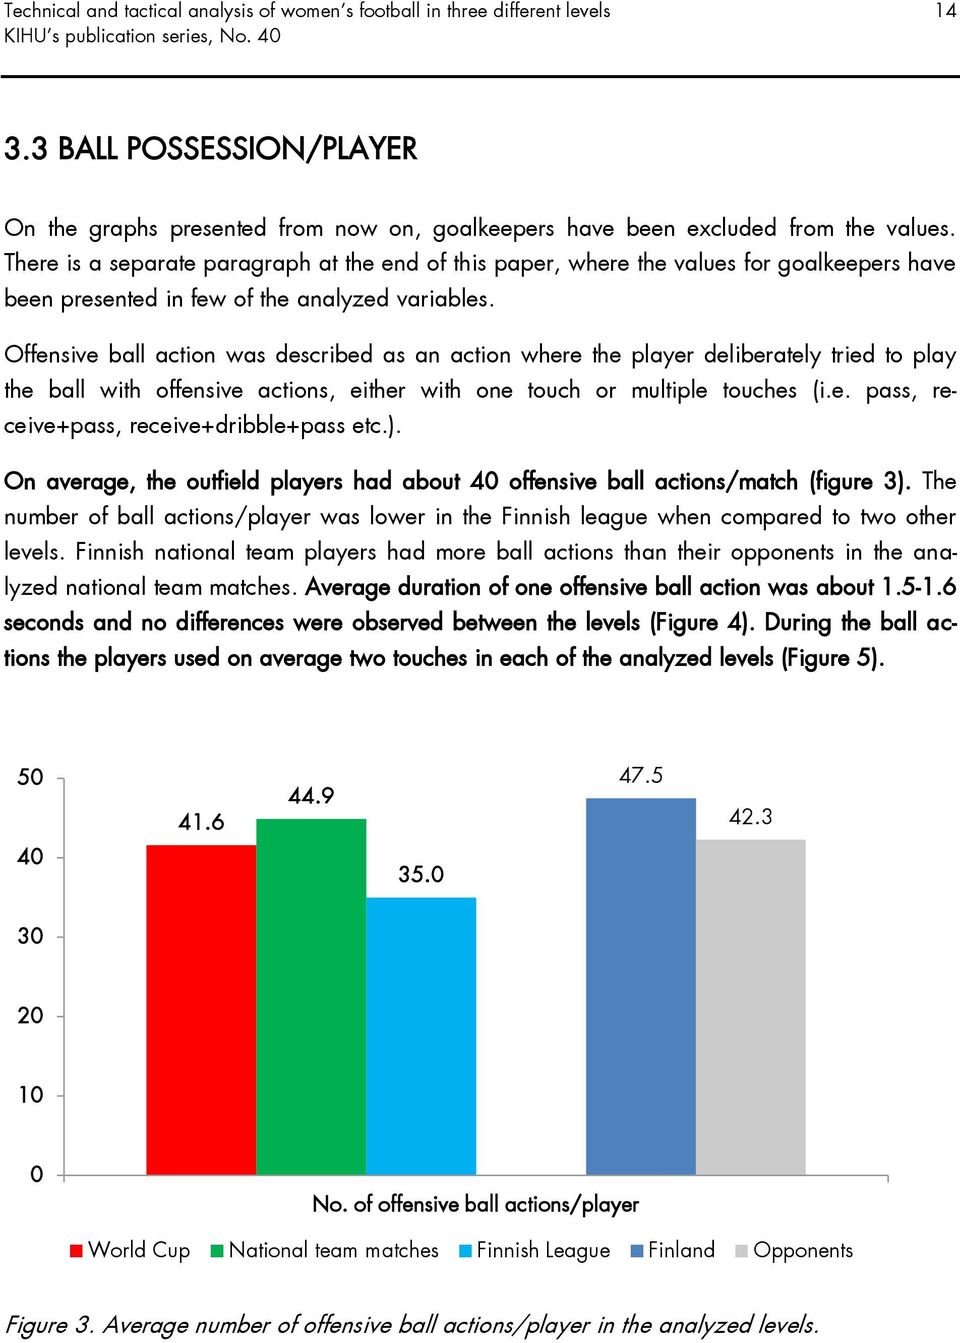 Offensive ball action was described as an action where the player deliberately tried to play the ball with offensive actions, either with one touch or multiple touches (i.e. pass, receive+pass, receive+dribble+pass etc.